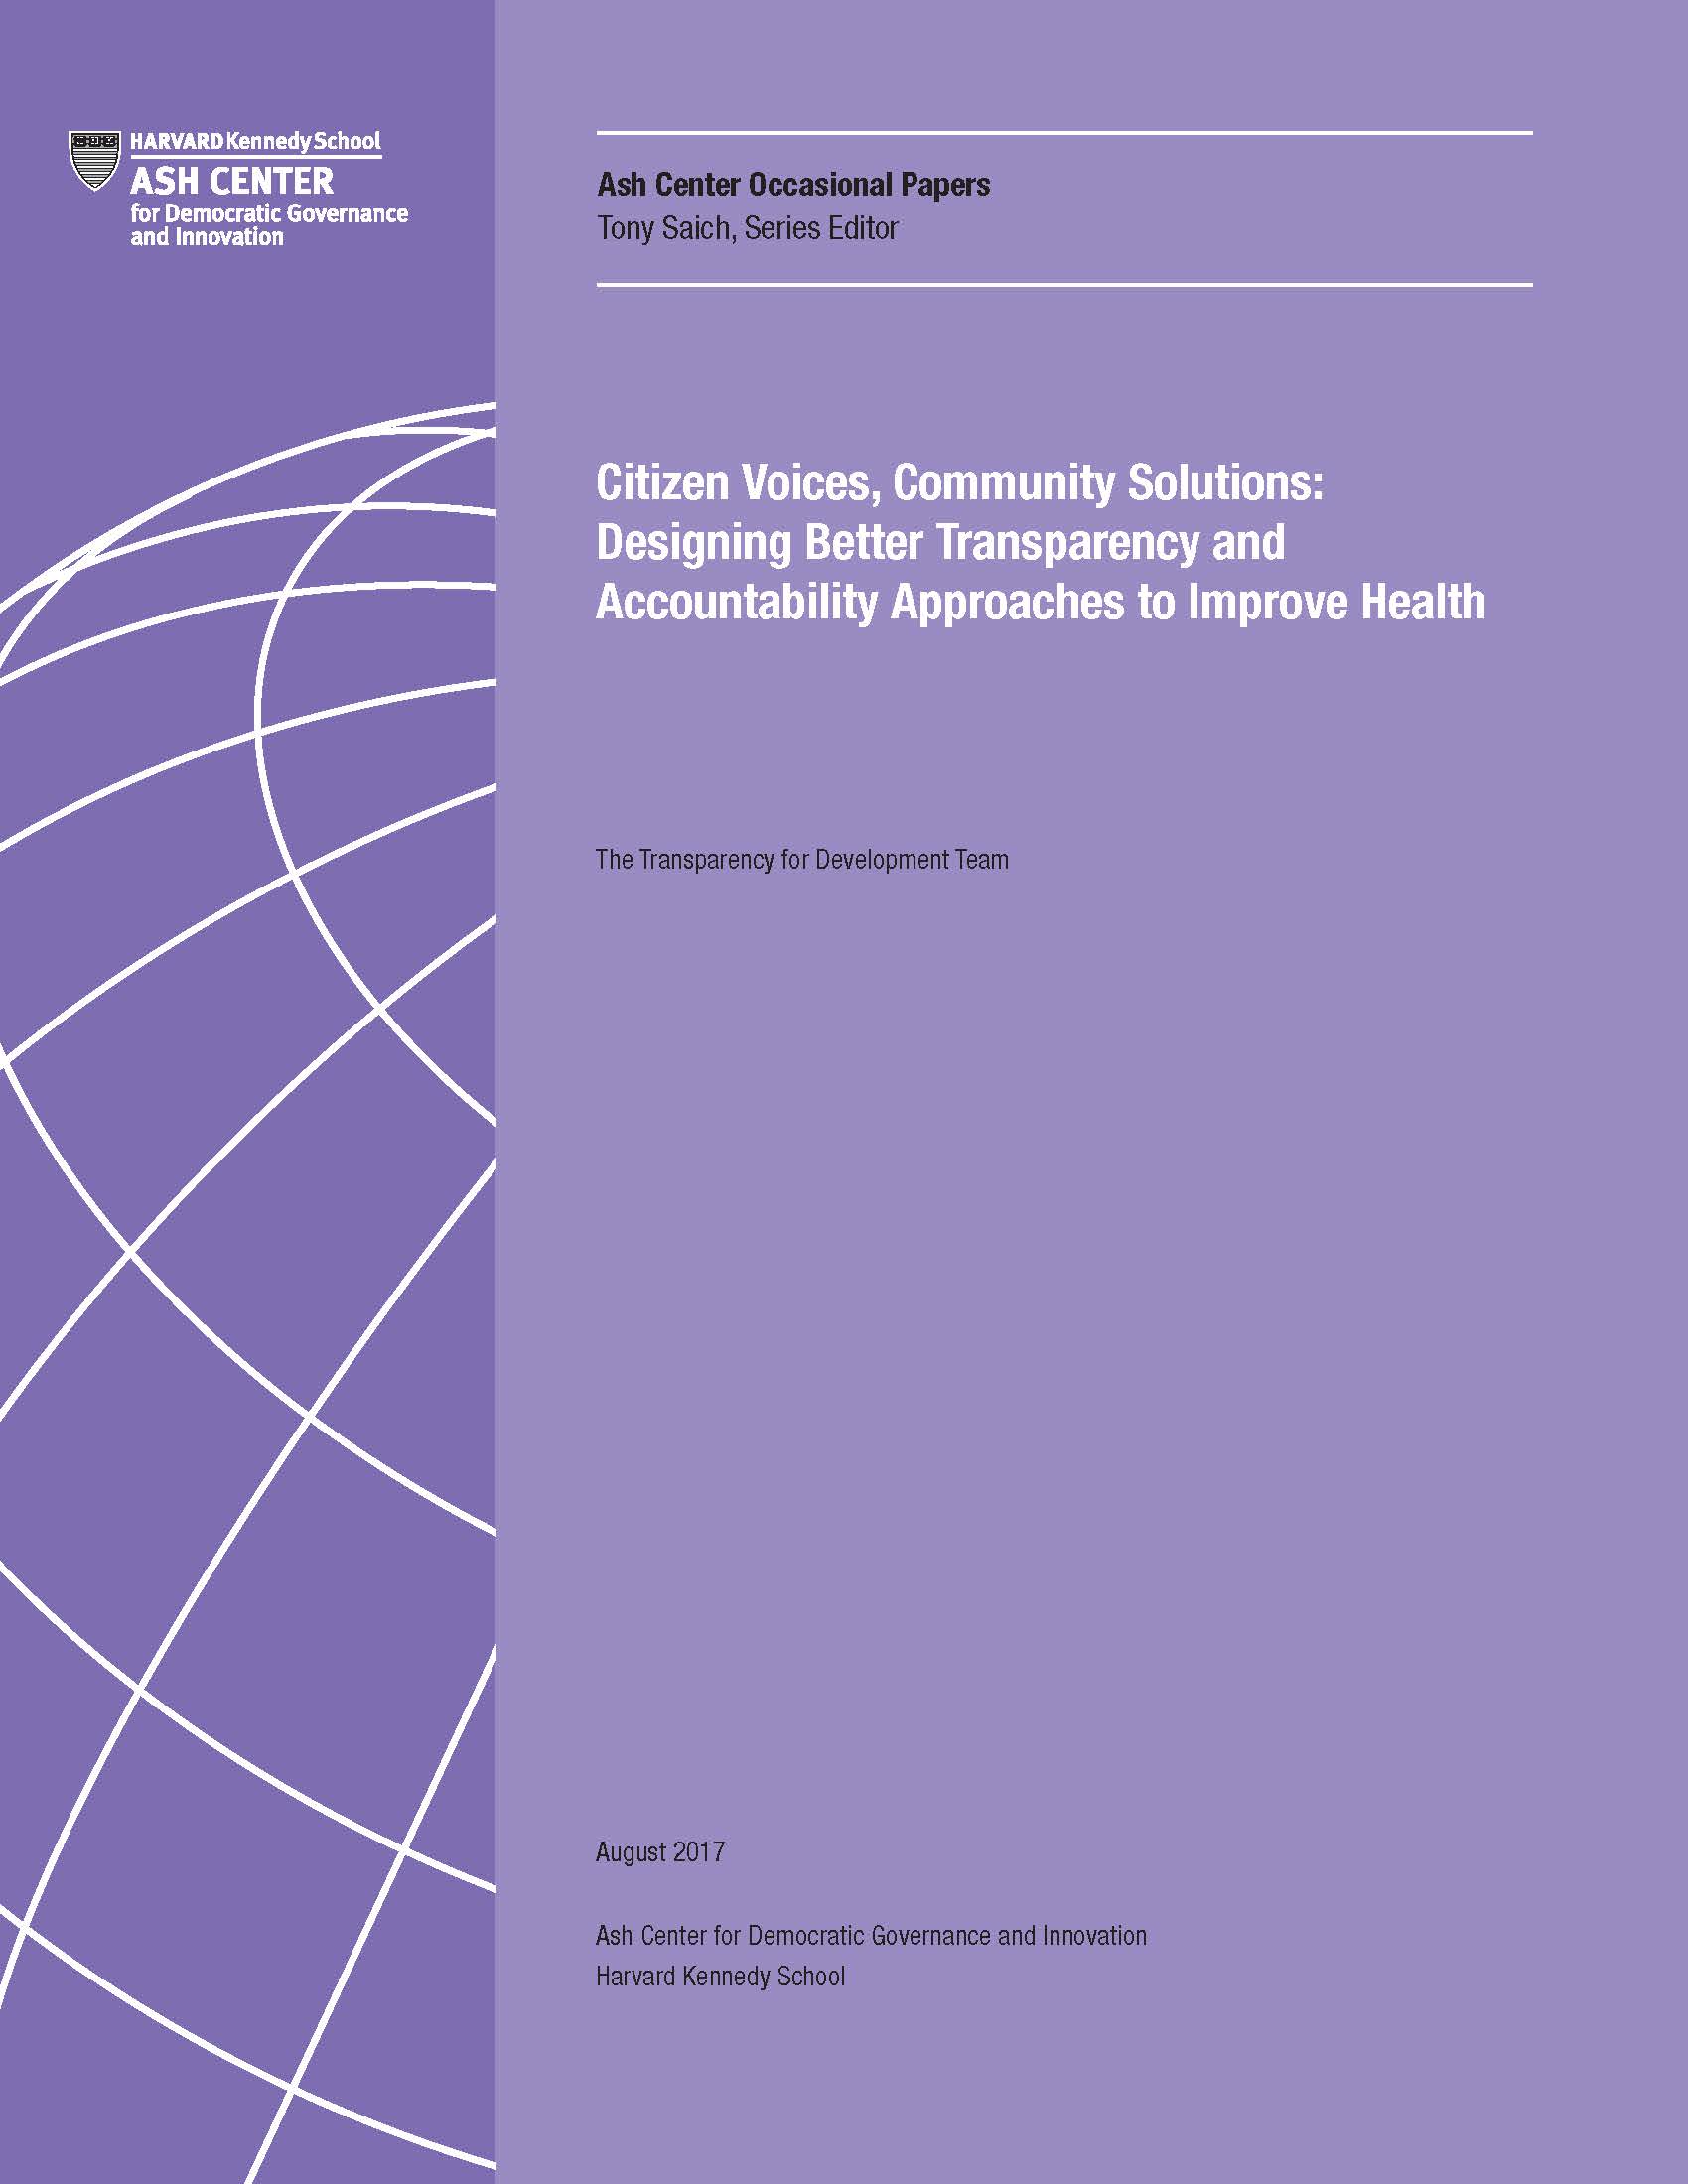 Citizen Voices, Community Solutions : Designing Better Transparency and Accountability Approaches to Improve Health